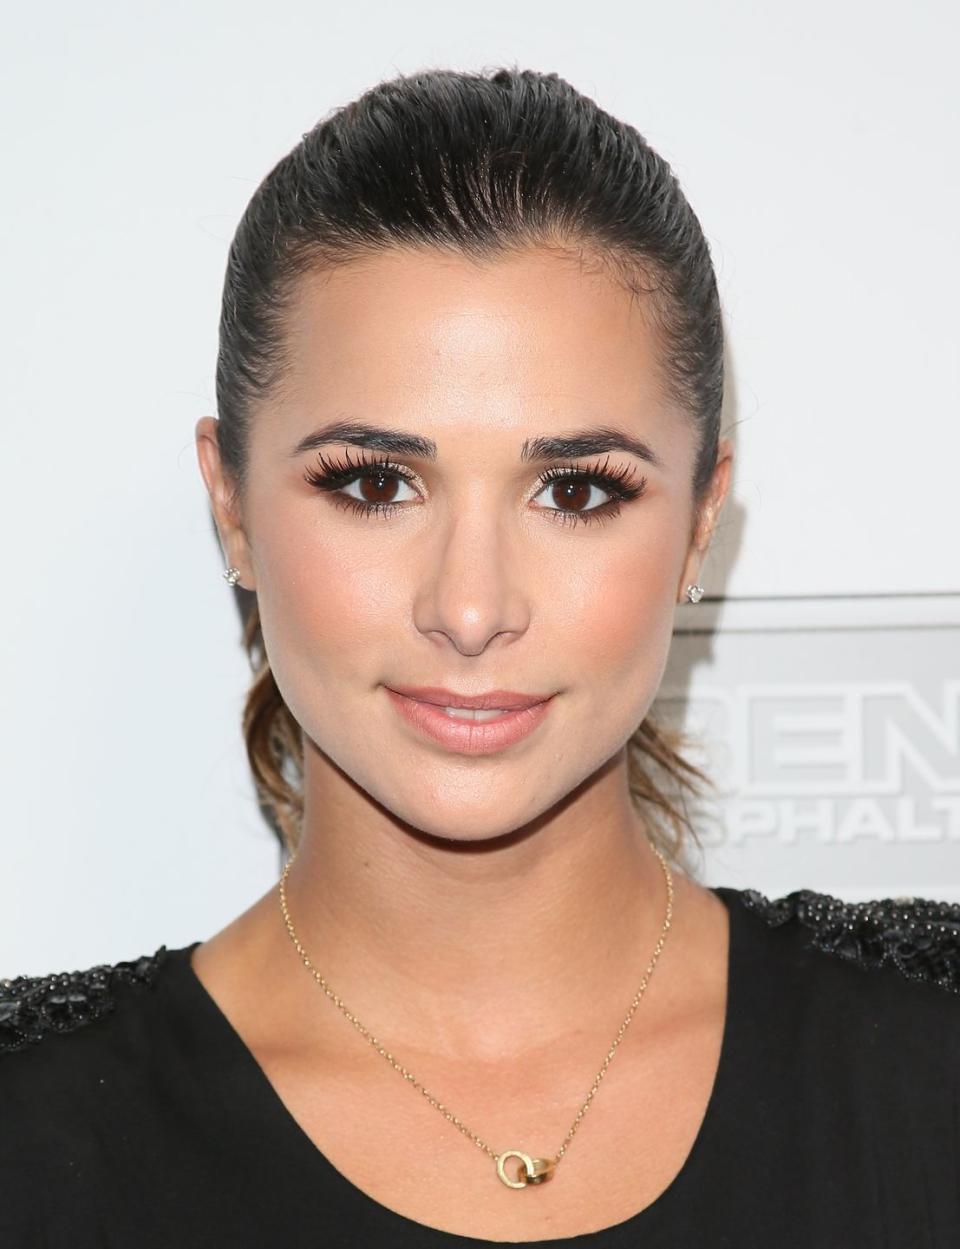 Josie Loren knew about the tragic fate of her character before signing on...